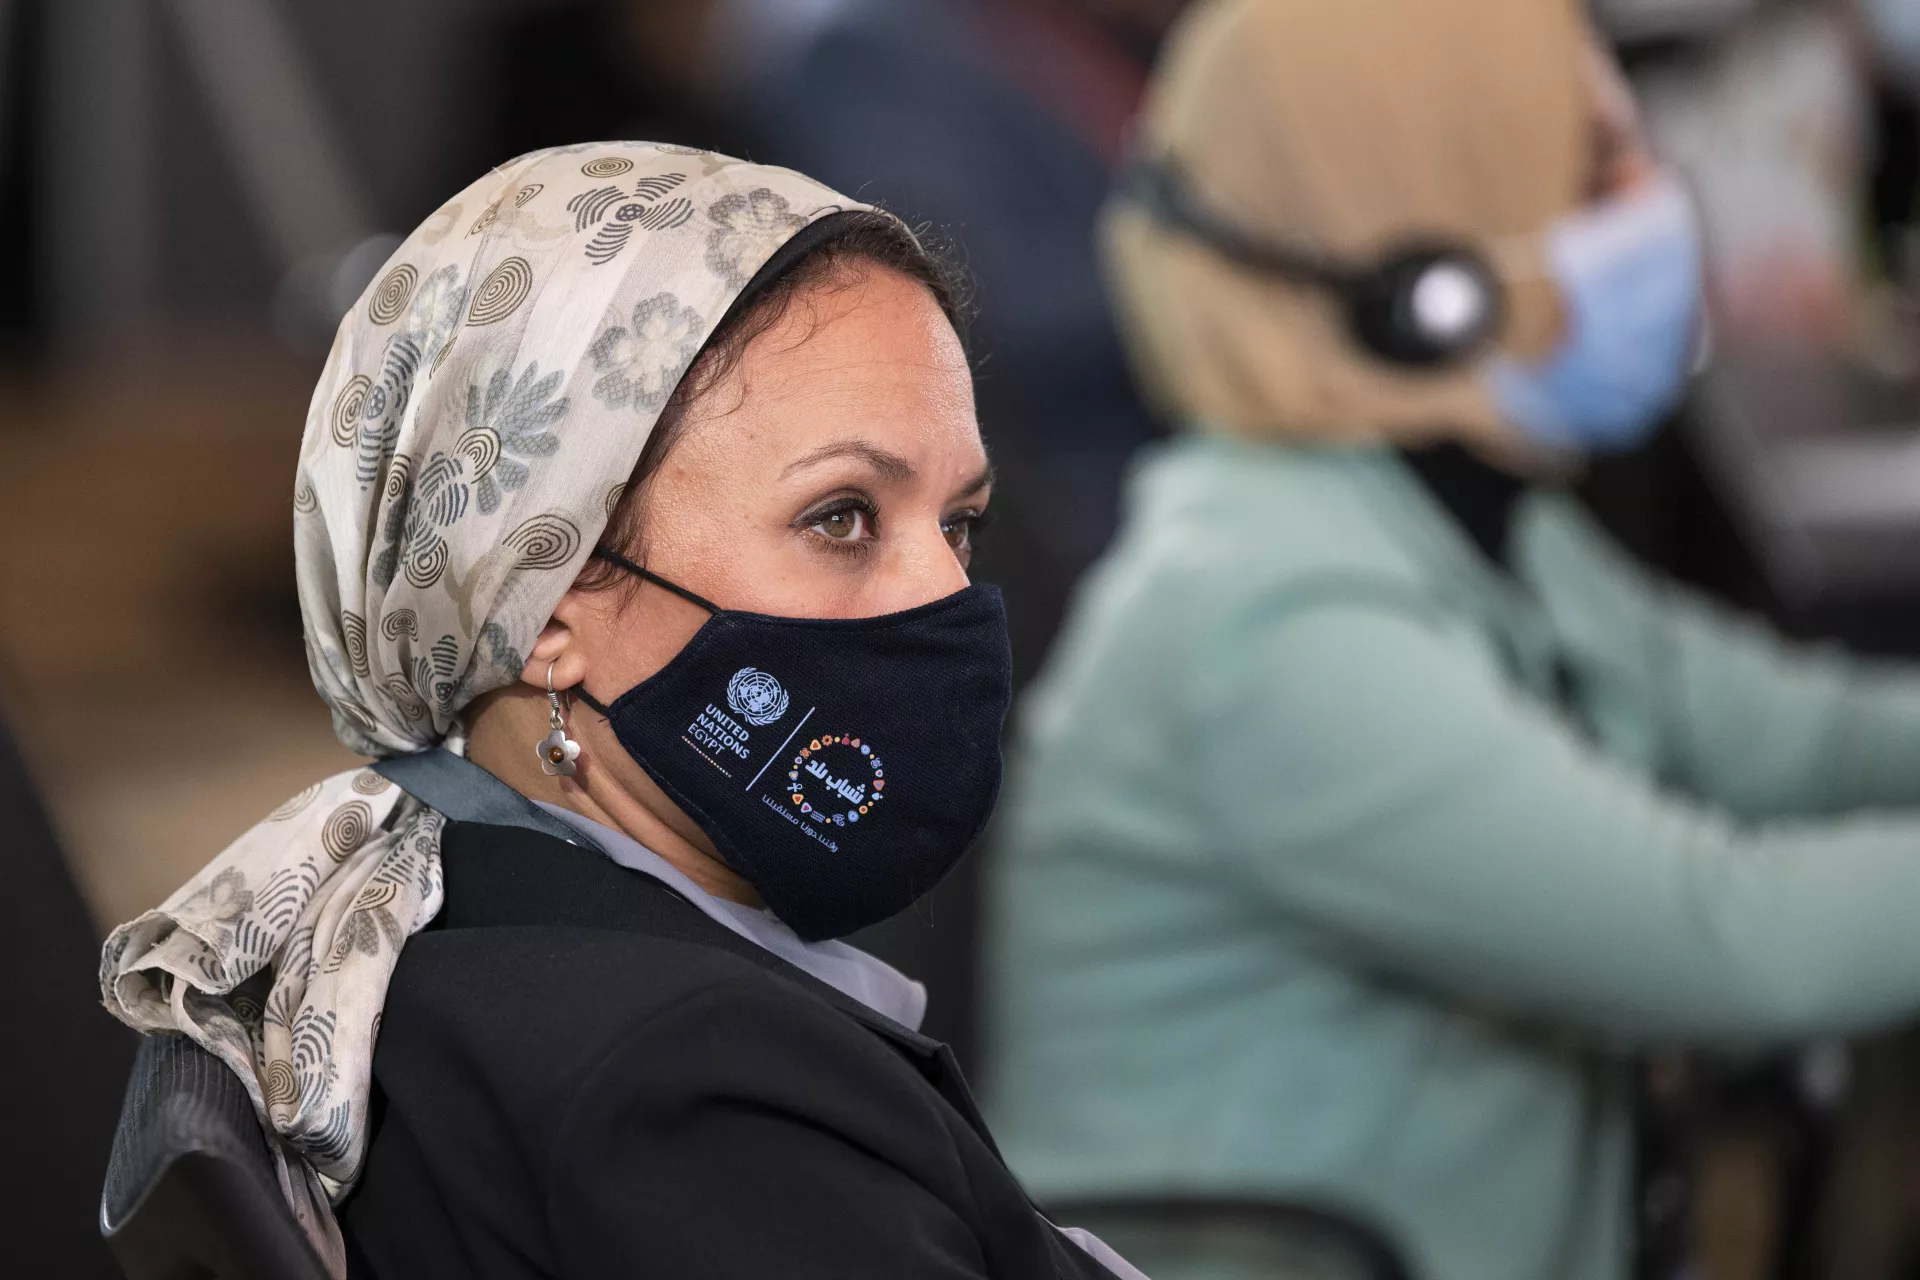 An attendee wearing a Generation Unlimited mask at the World Youth Forum